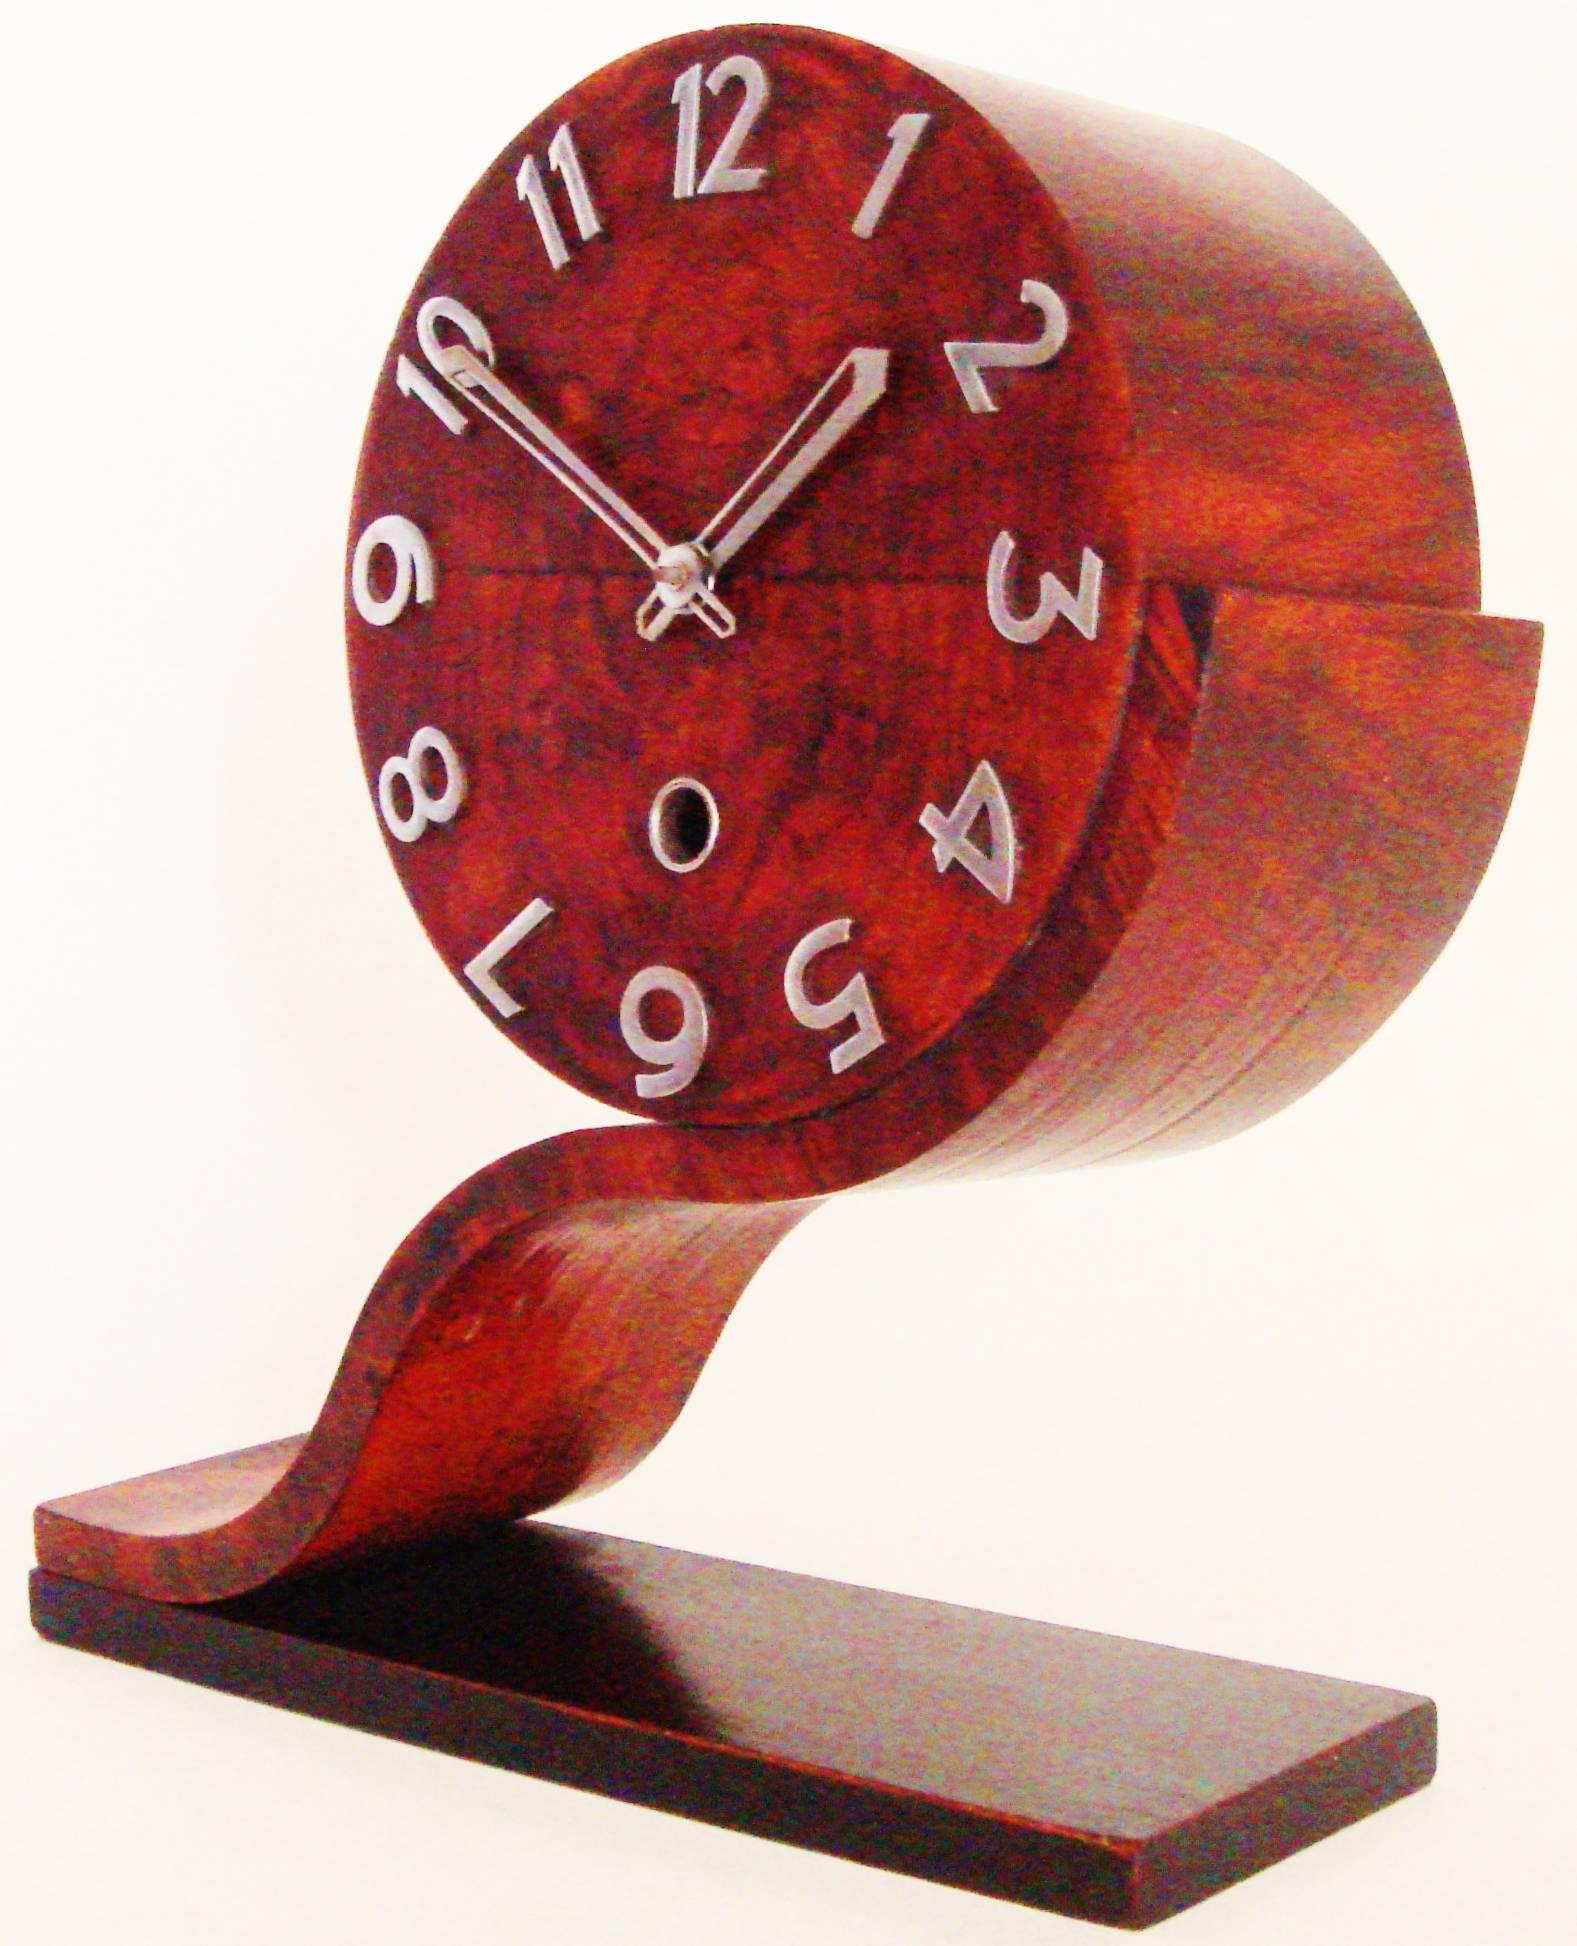 This iconic English Norland Art Deco mechanical asymmetrical mantle clock is a triumph of the design of the inter war period. A tilde or wave shaped walnut support rises up from an oblong ebonised base and is topped with a drum shaped clock case